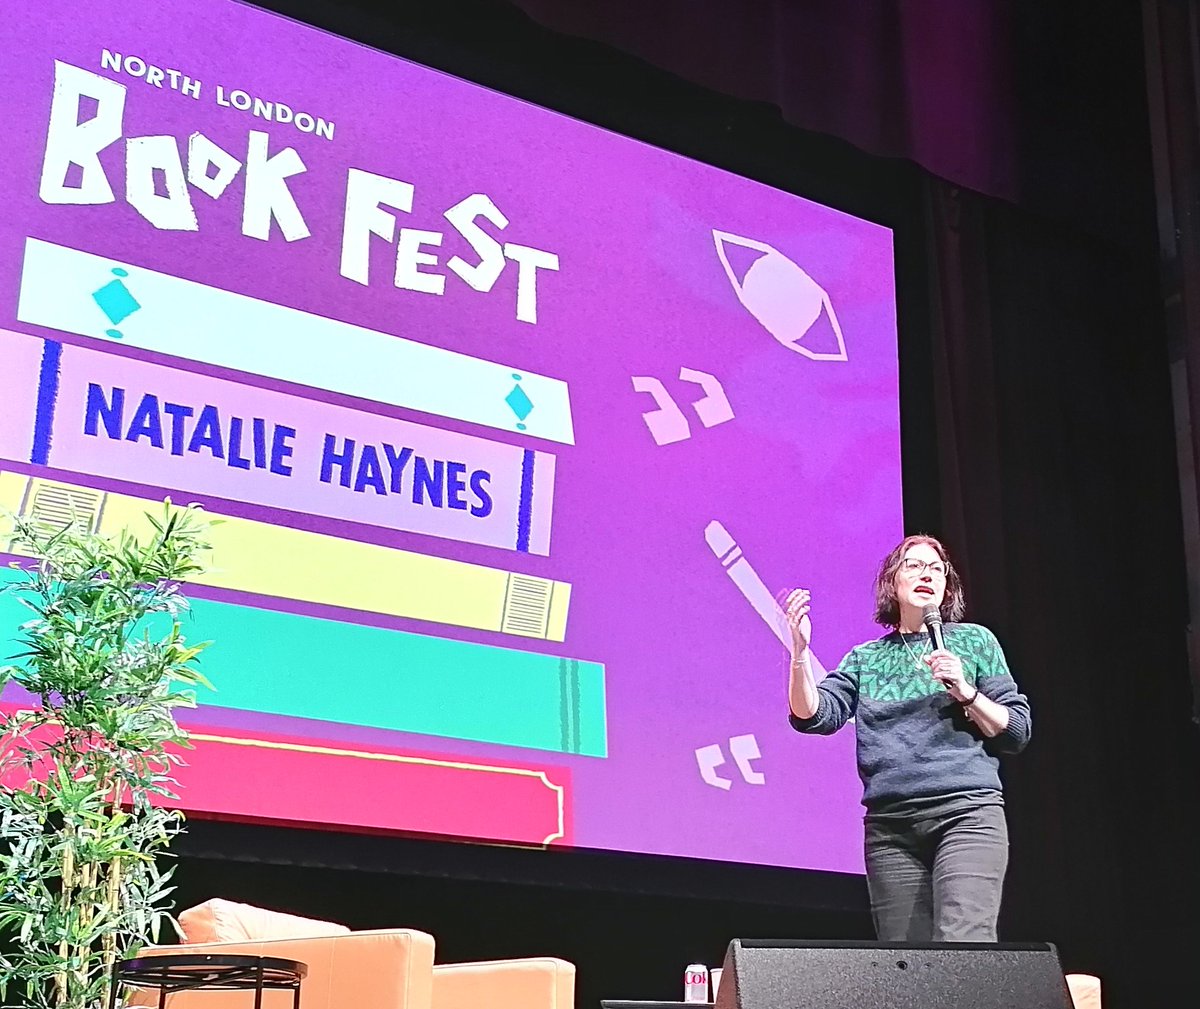 Great to see - and hear - @officialnhaynes in full flow this weekend @NLBookFest covering everything from snooker to Homer to diet coke and delighting the audience (beware guitar players) with her incredible knowledge and wittiness. A great event.